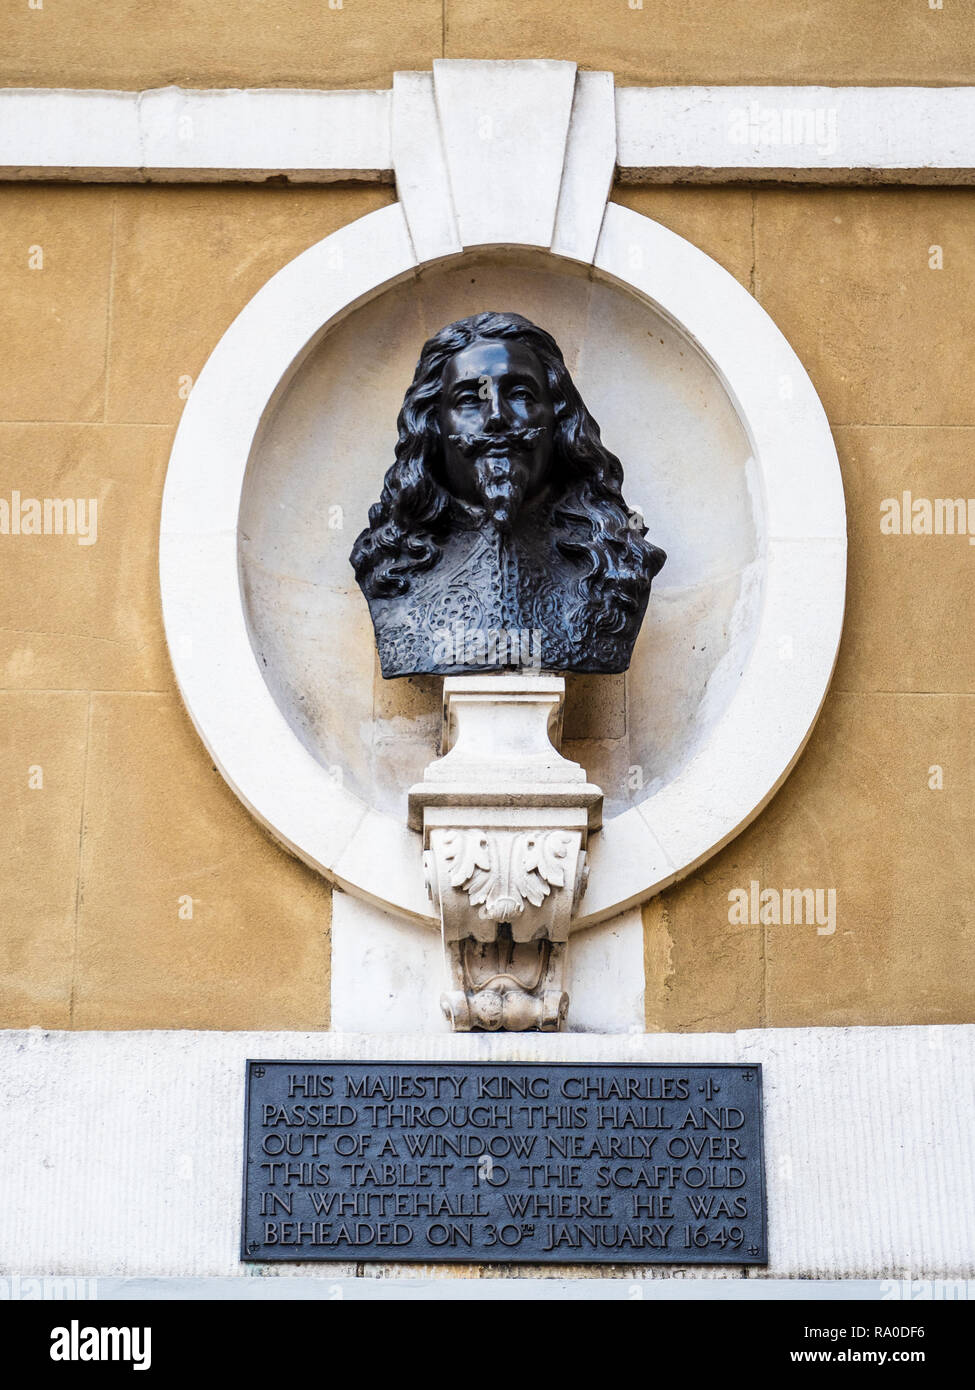 King Charles I statue bust Banqueting House London - King Charles I (1600-1649) was executed on 30 January 1649 in front of Banqueting House Whitehall Stock Photo